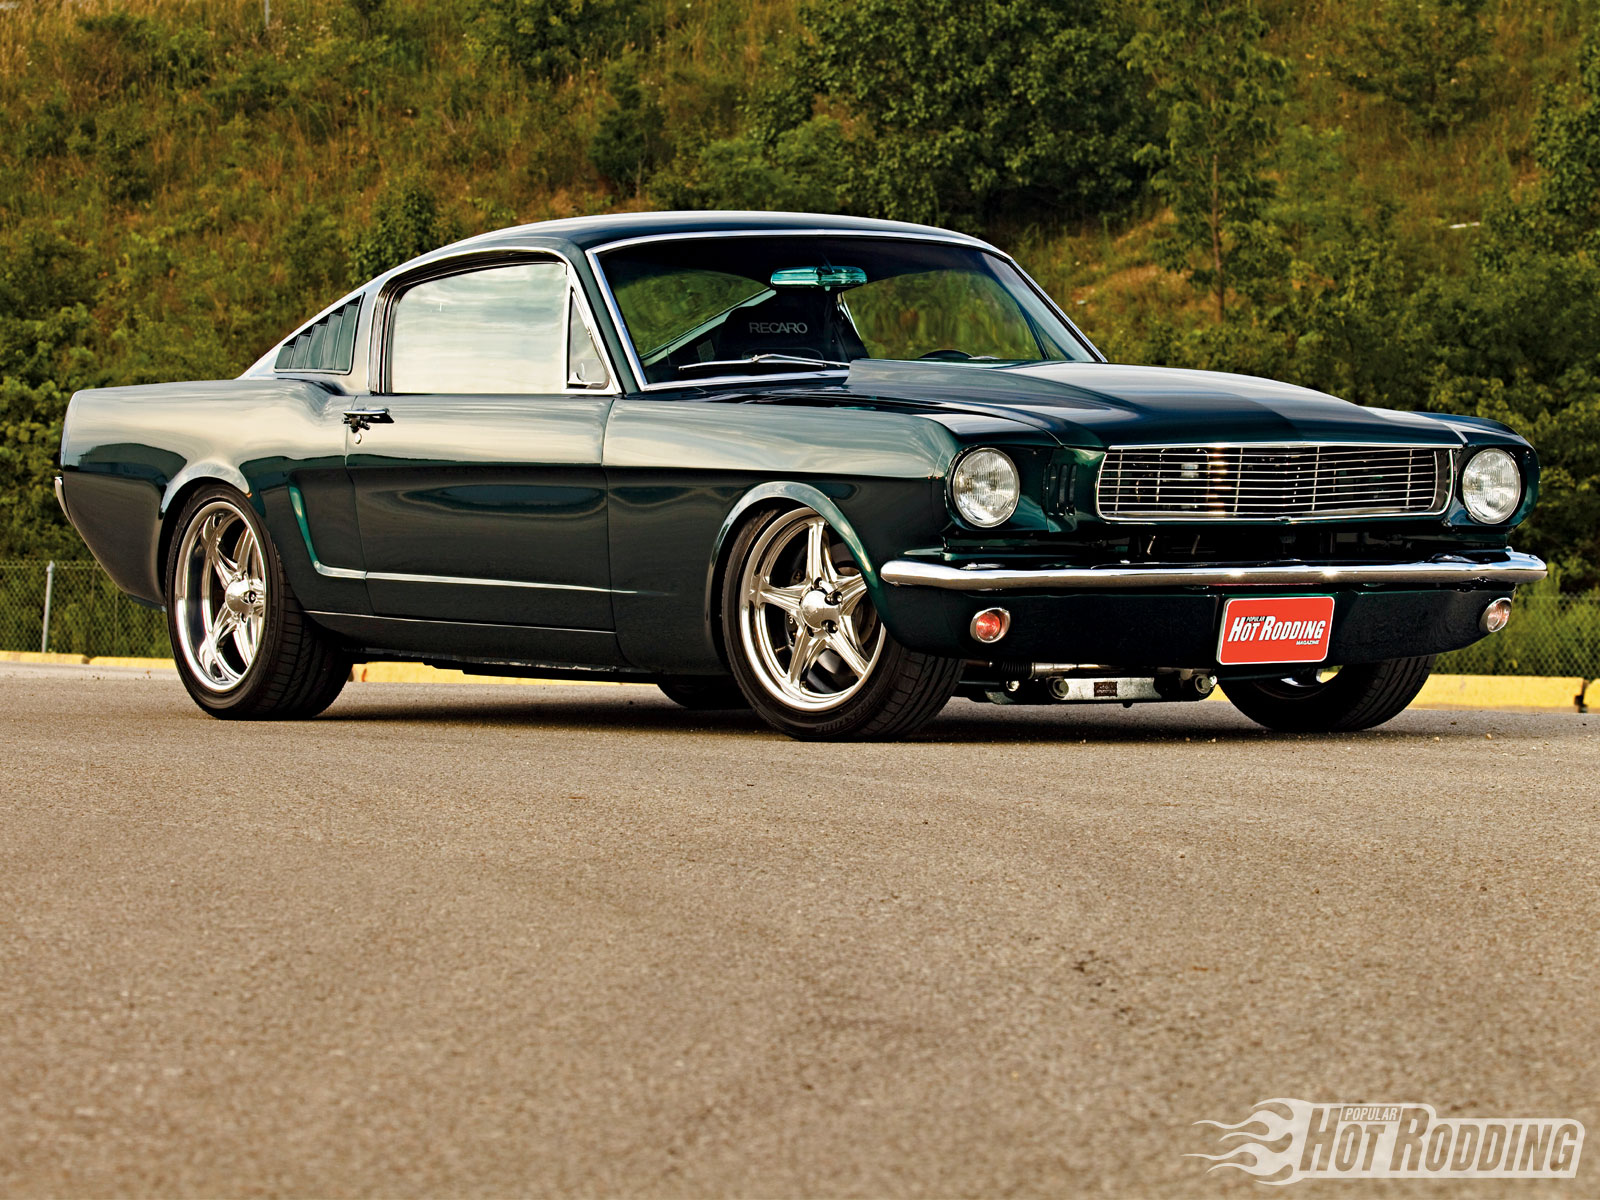 Ford Mustang Muscle Cars Hot Rod X Wallpaper